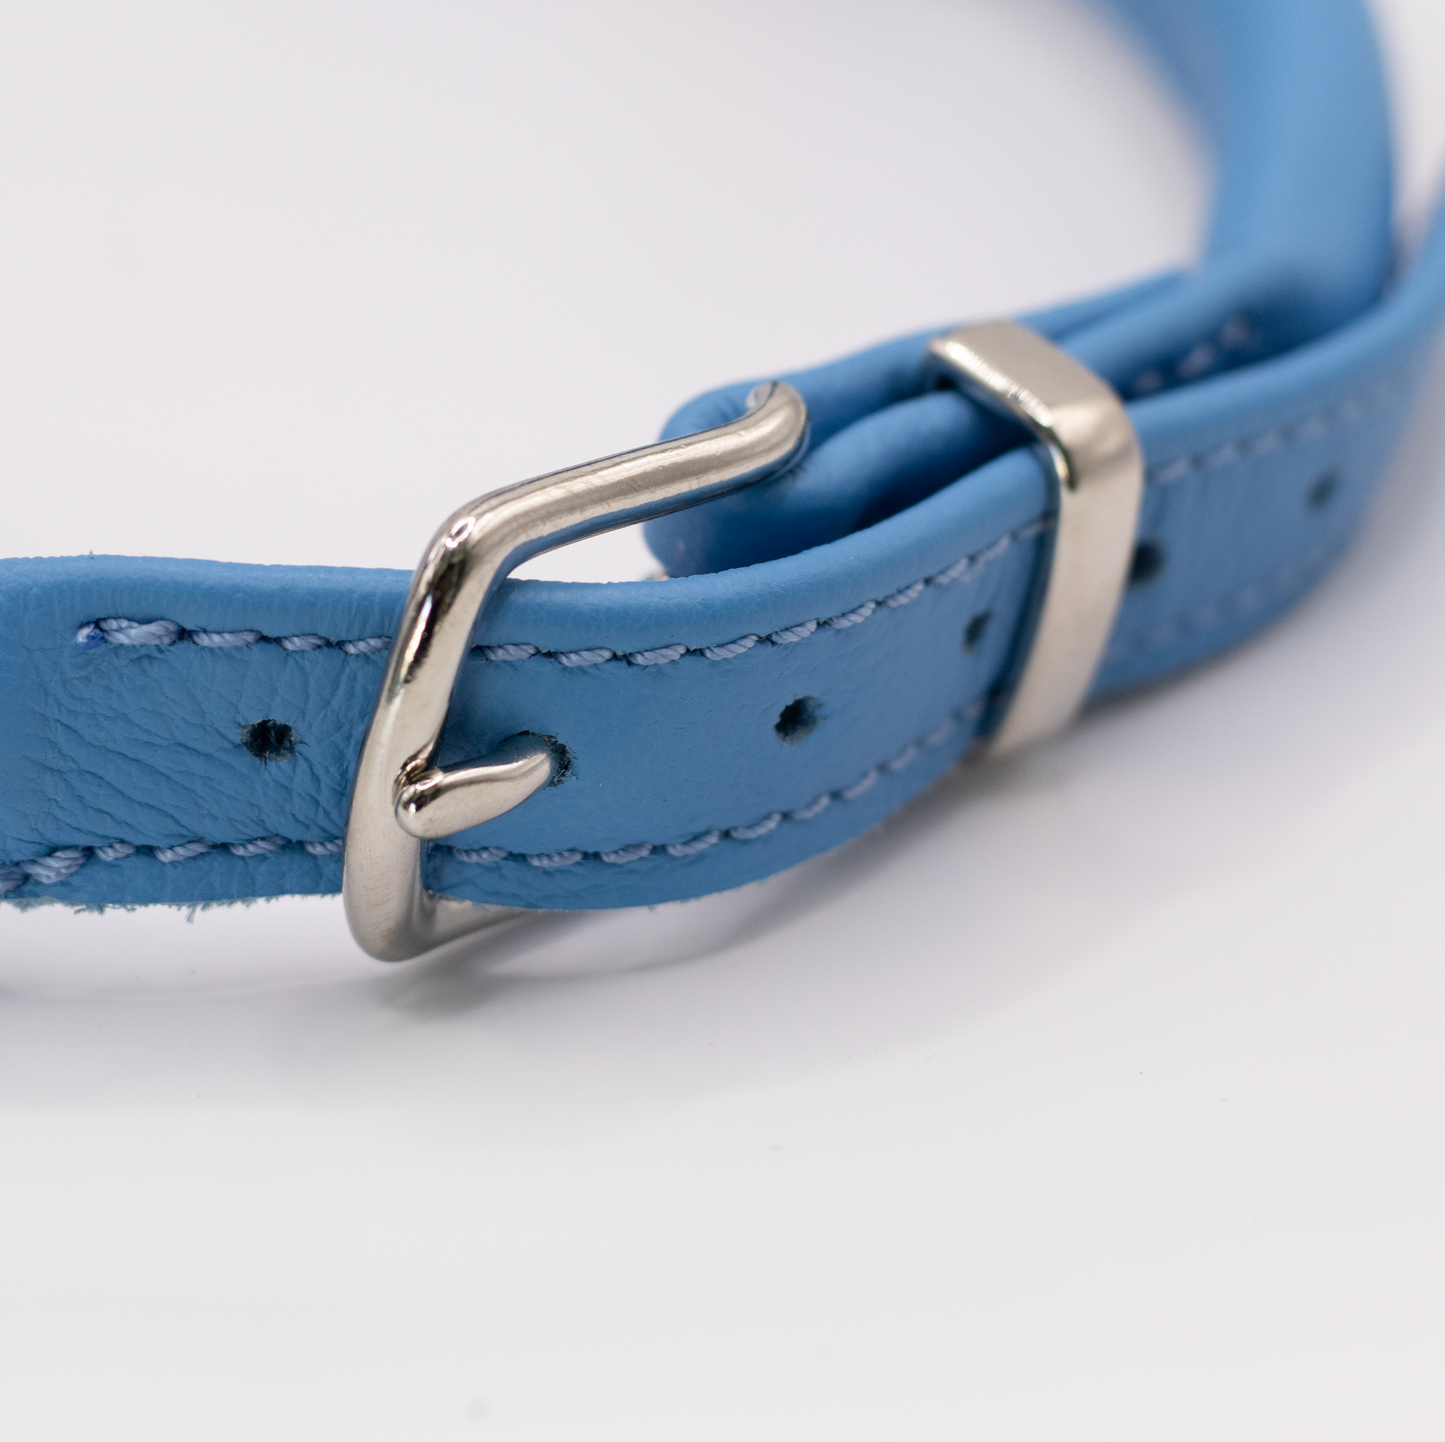 D&H Rolled Leather Dog Harness Blue